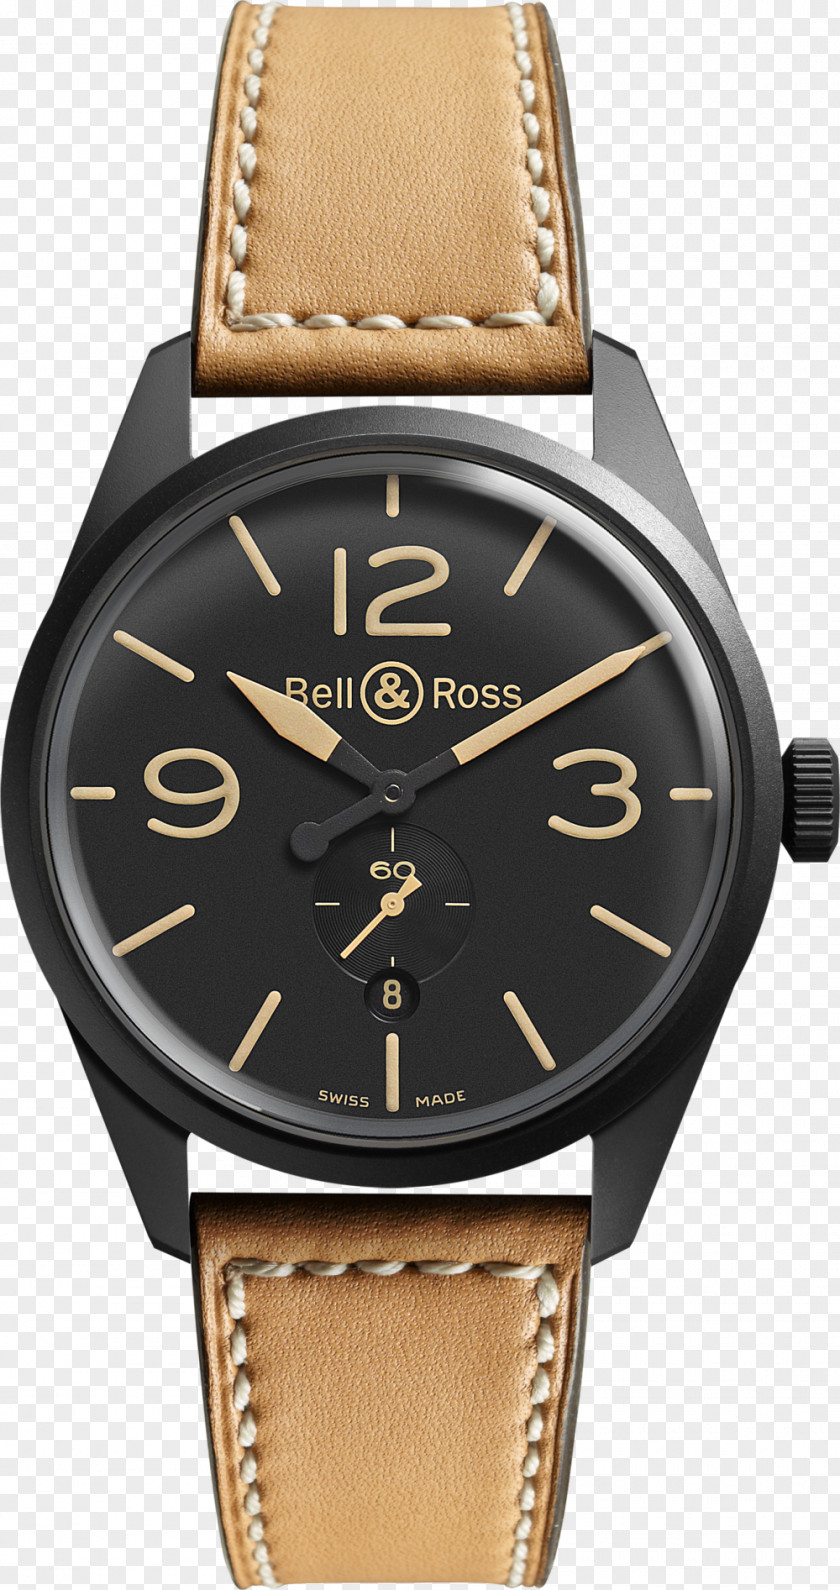 Watch Bell & Ross, Inc. Automatic Strap PNG